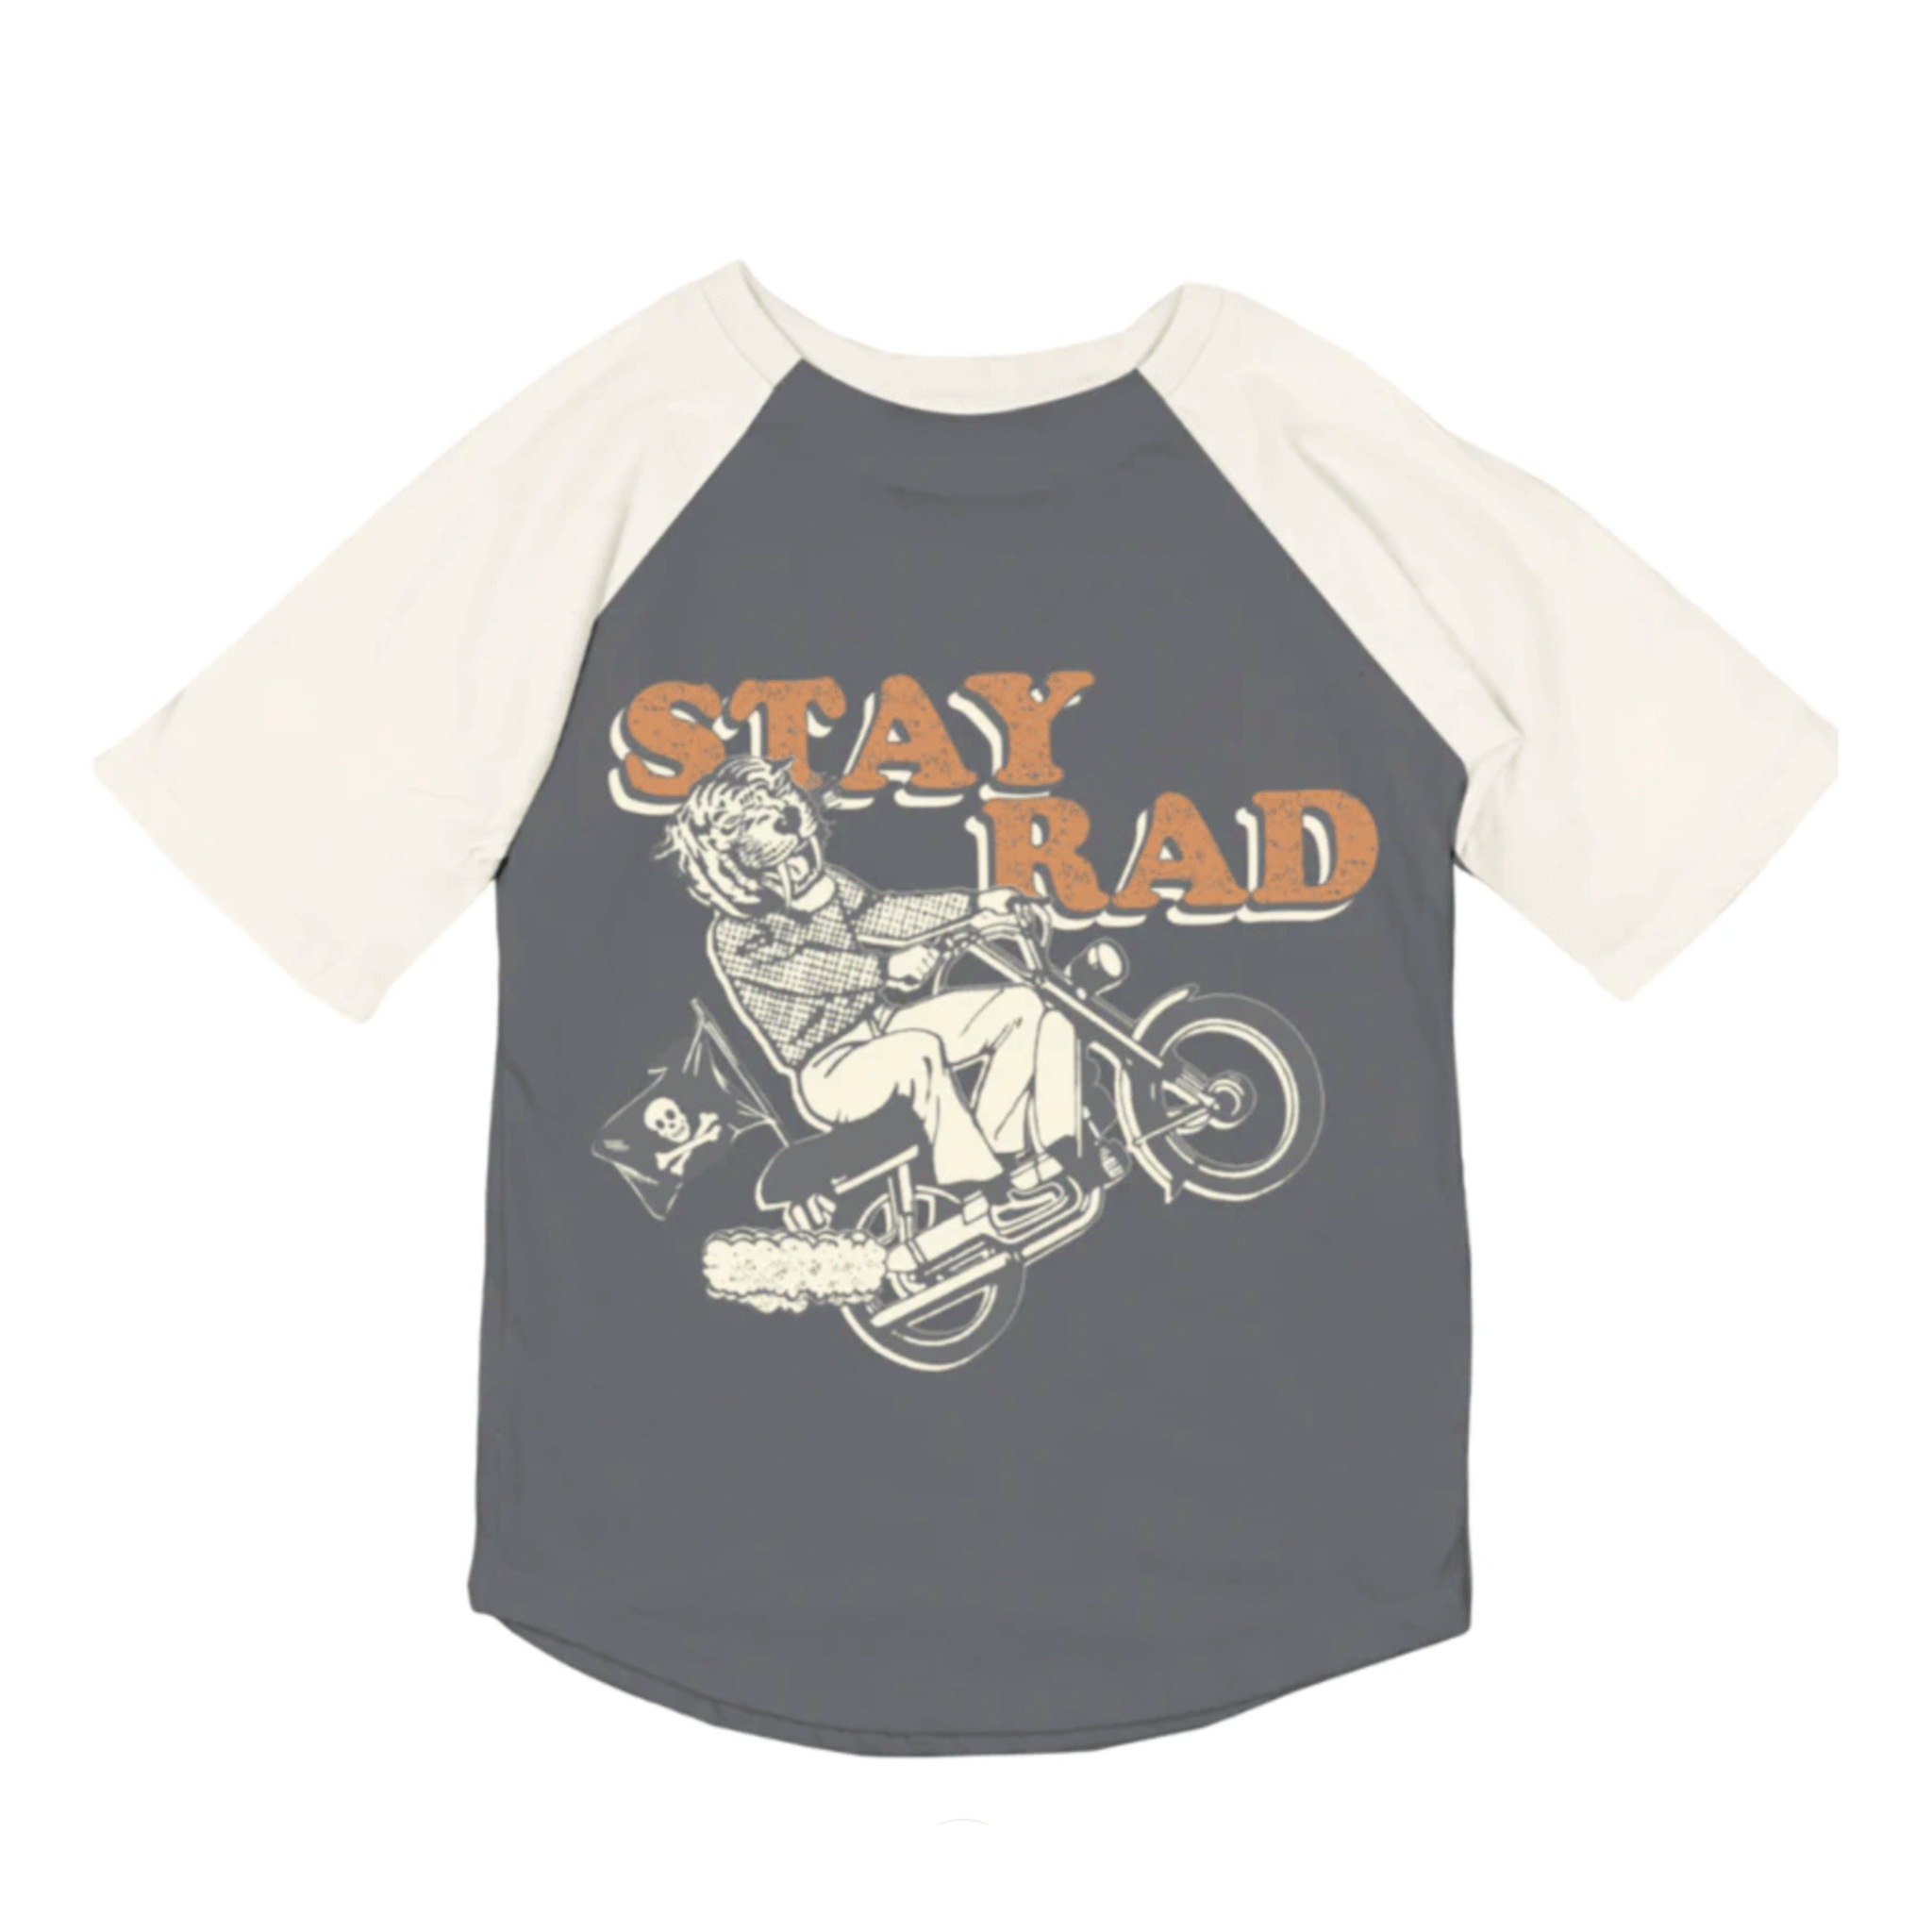 On a white background is a vintage faded black t-shirt for children with ivory short sleeves and a graphic of a tiger riding a motorcycle and text above it that reads, "Stay Rad". 